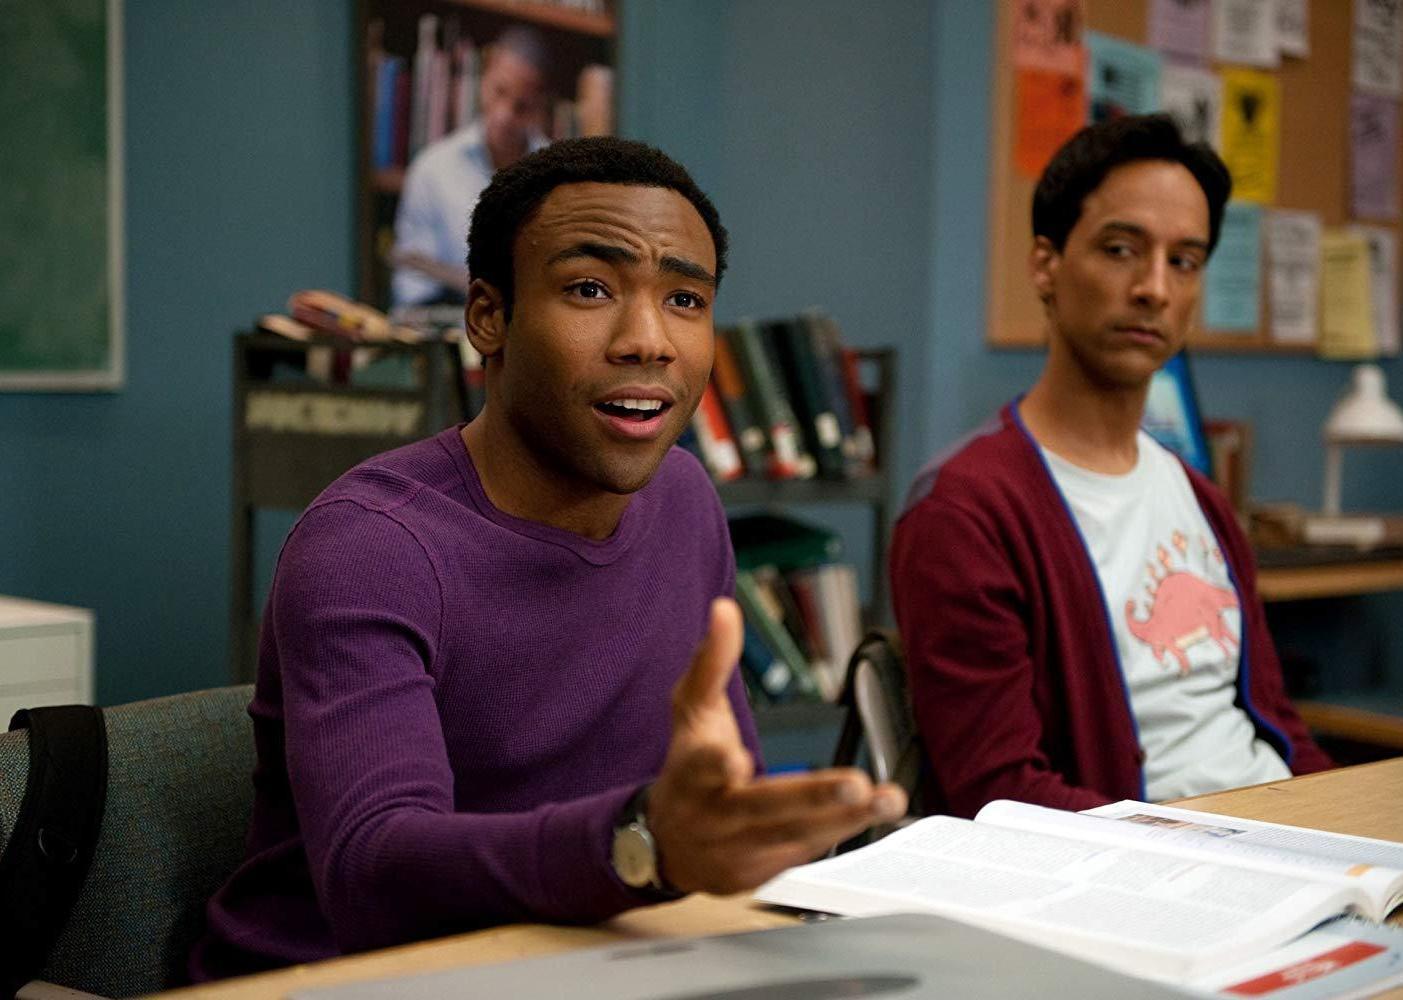 Actors in a scene from ‘Community’.